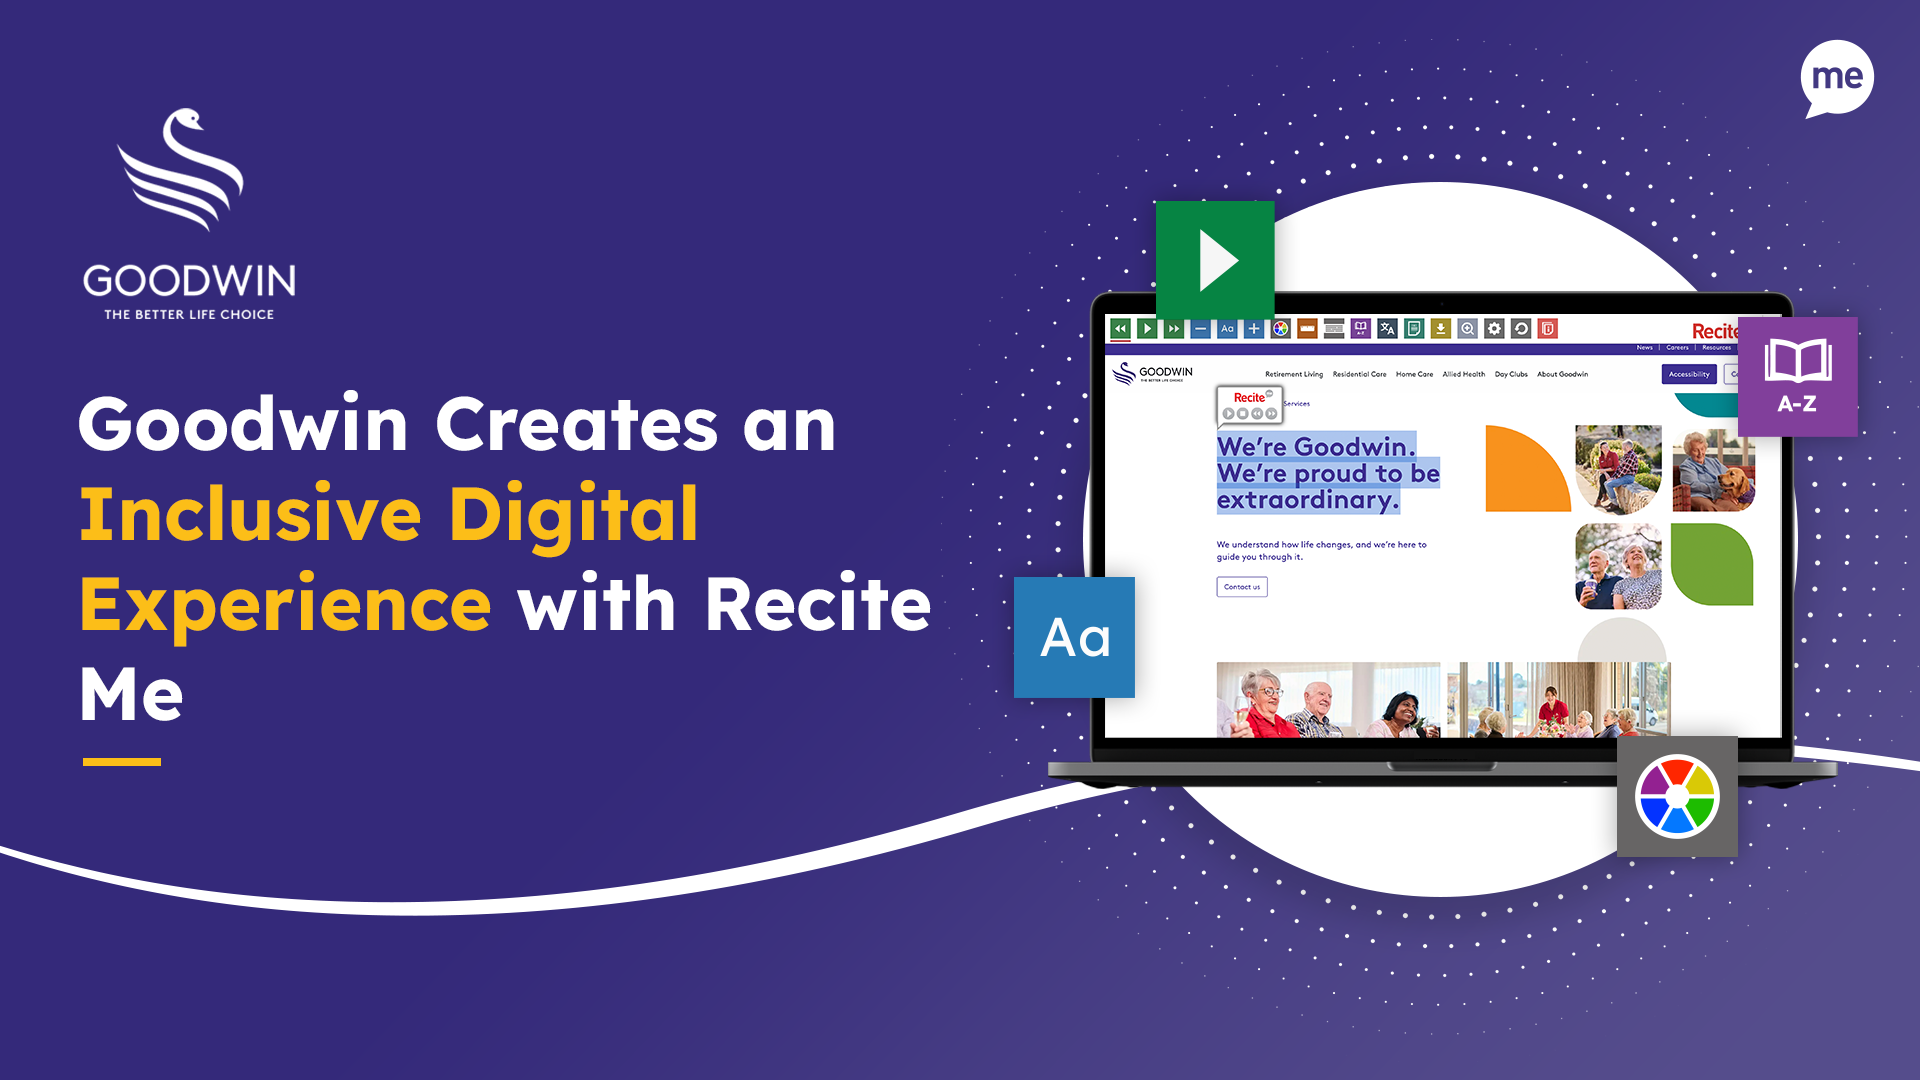 Goodwin Creates an Inclusive Digital Experience with Recite Me